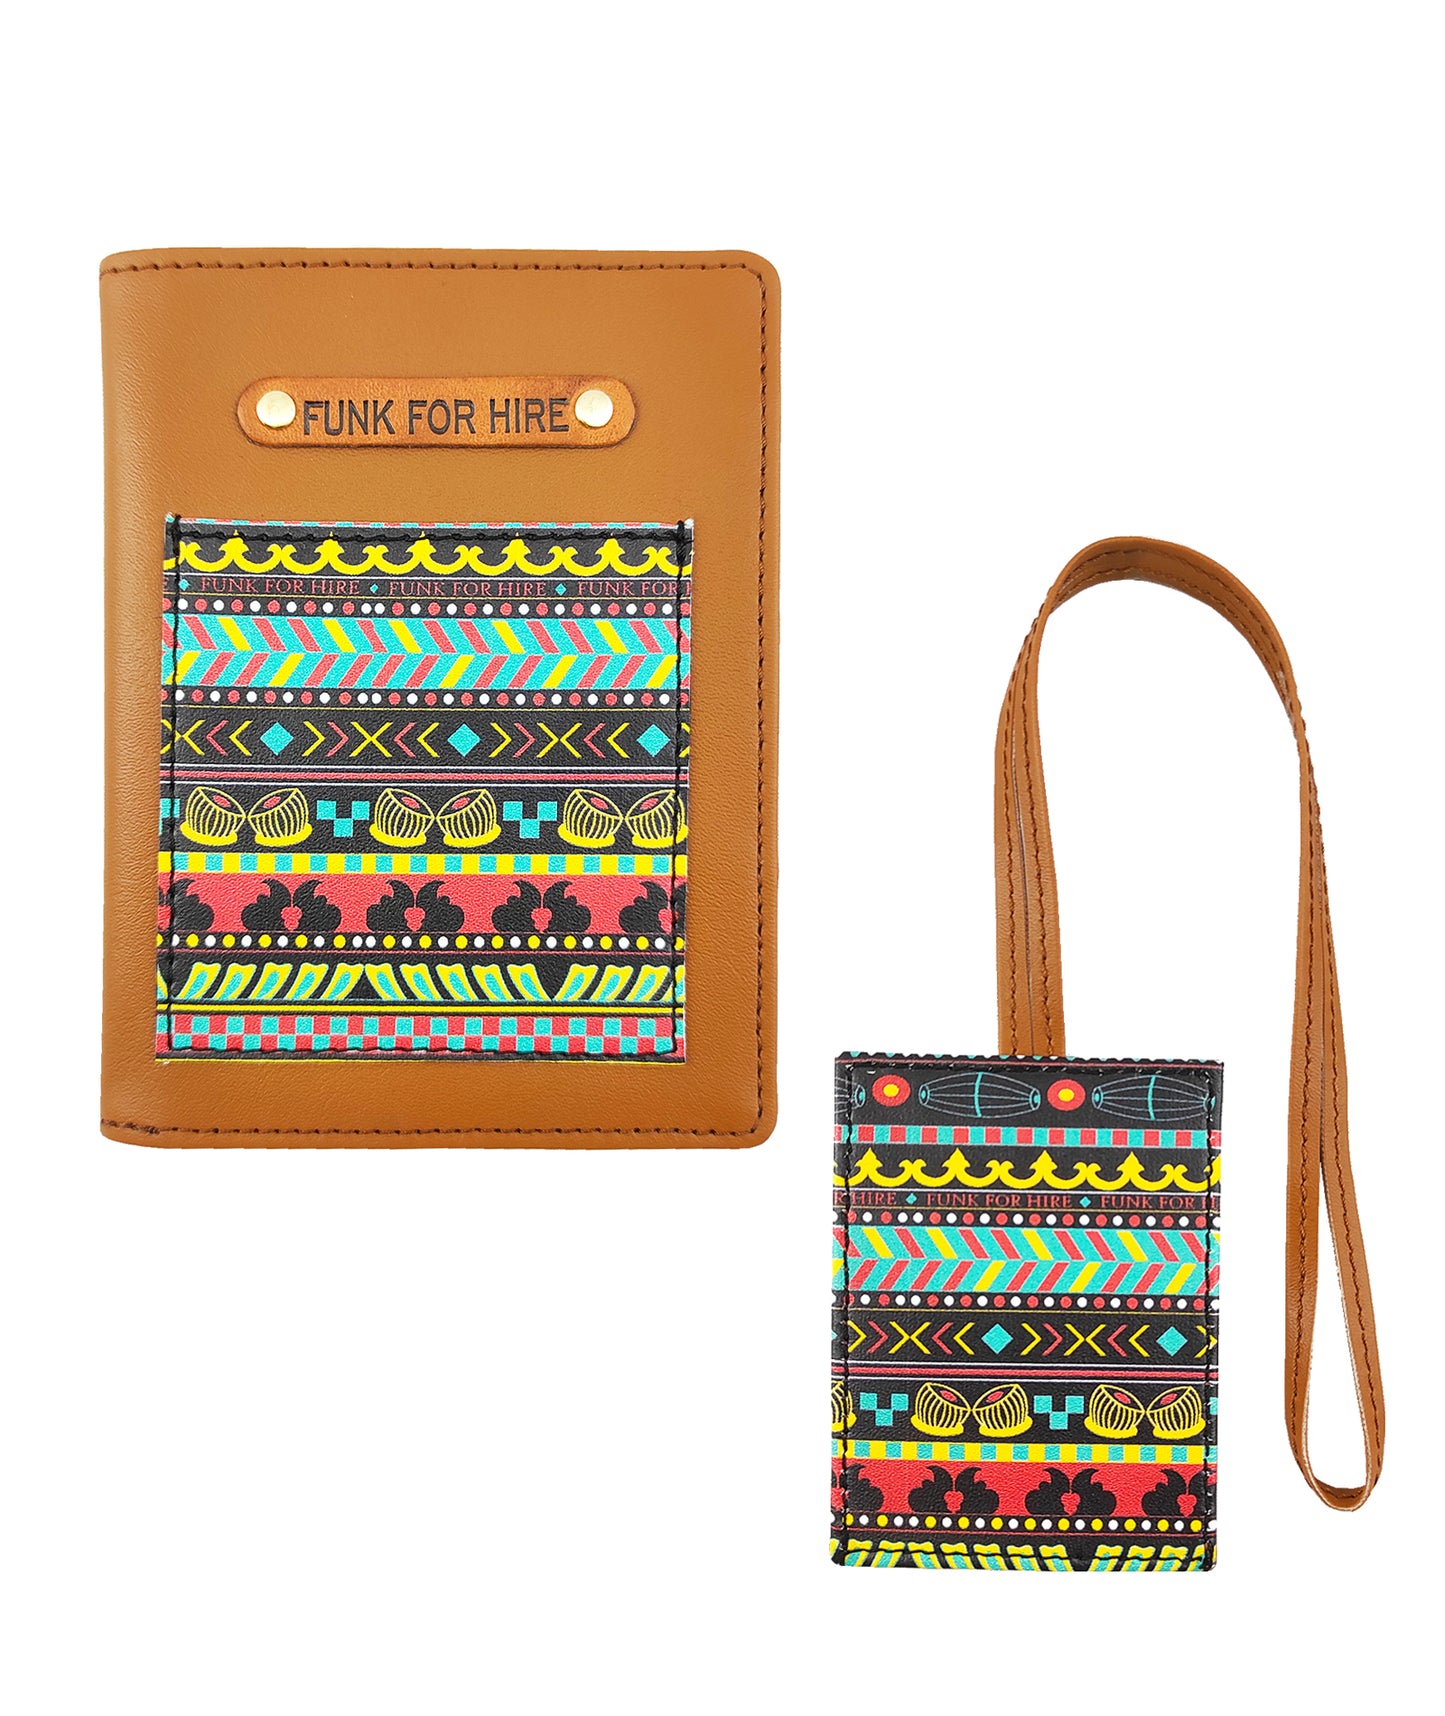 Travel Combo: Match Box Backpack and Music Border Passport Case